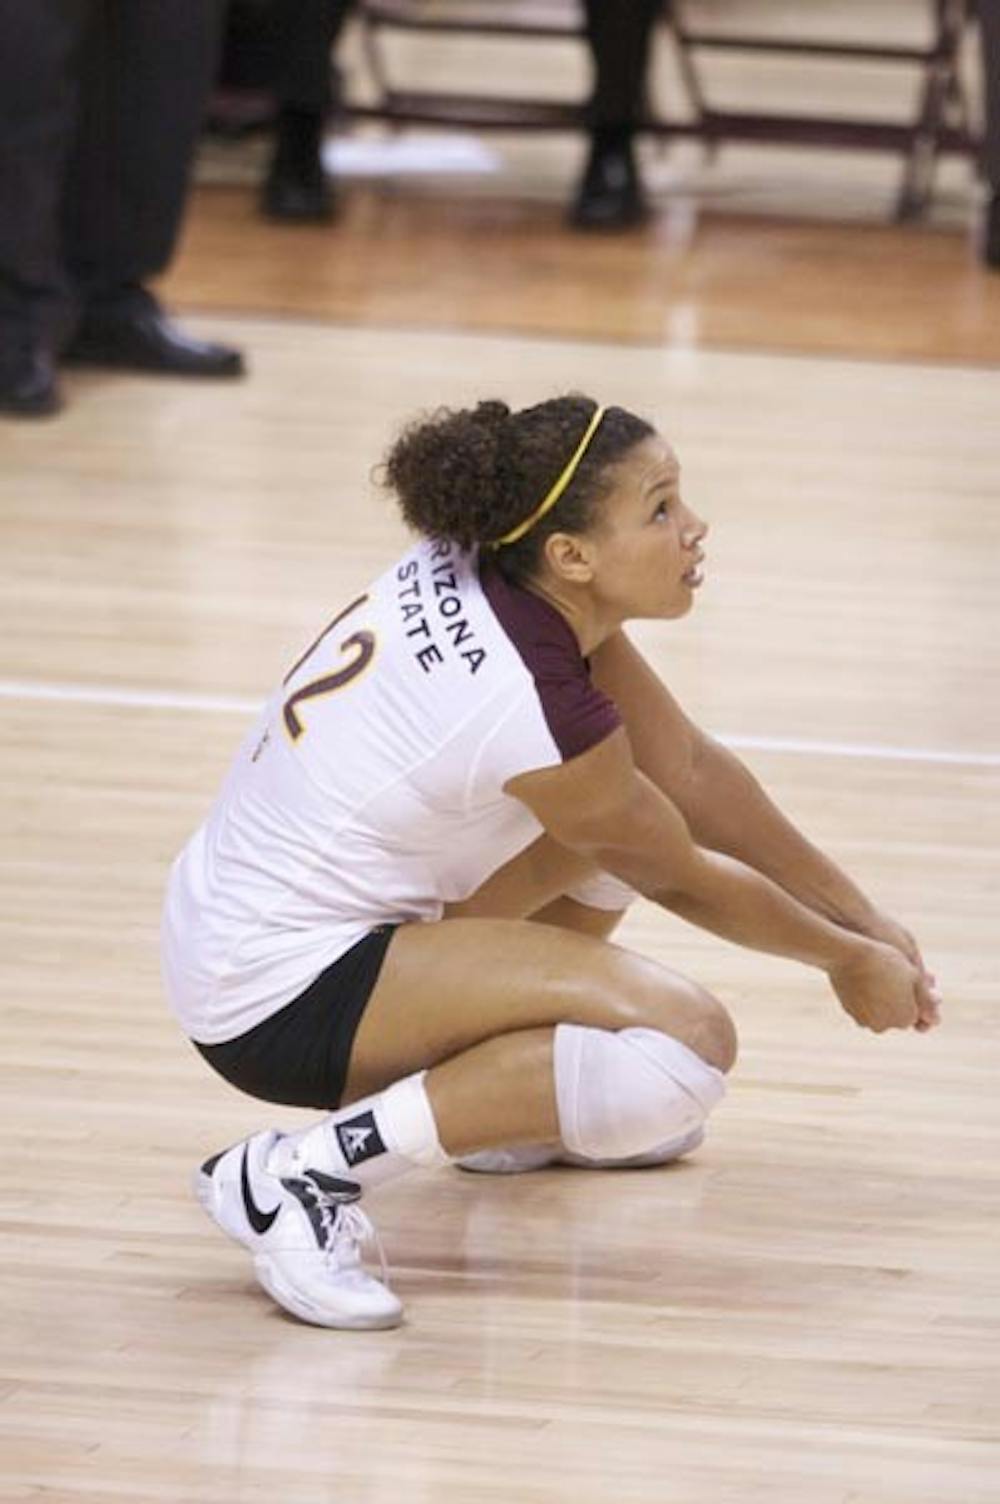 STILL CLIMBING: Senior outside hitter Sarah Reaves crouches low for a bump during a match earlier this season. Over the weekend, Reaves moved into third place on the ASU career kills list, surpassing former volleyball standout Amanda Burbridge. (Photo by Scott Stuk)